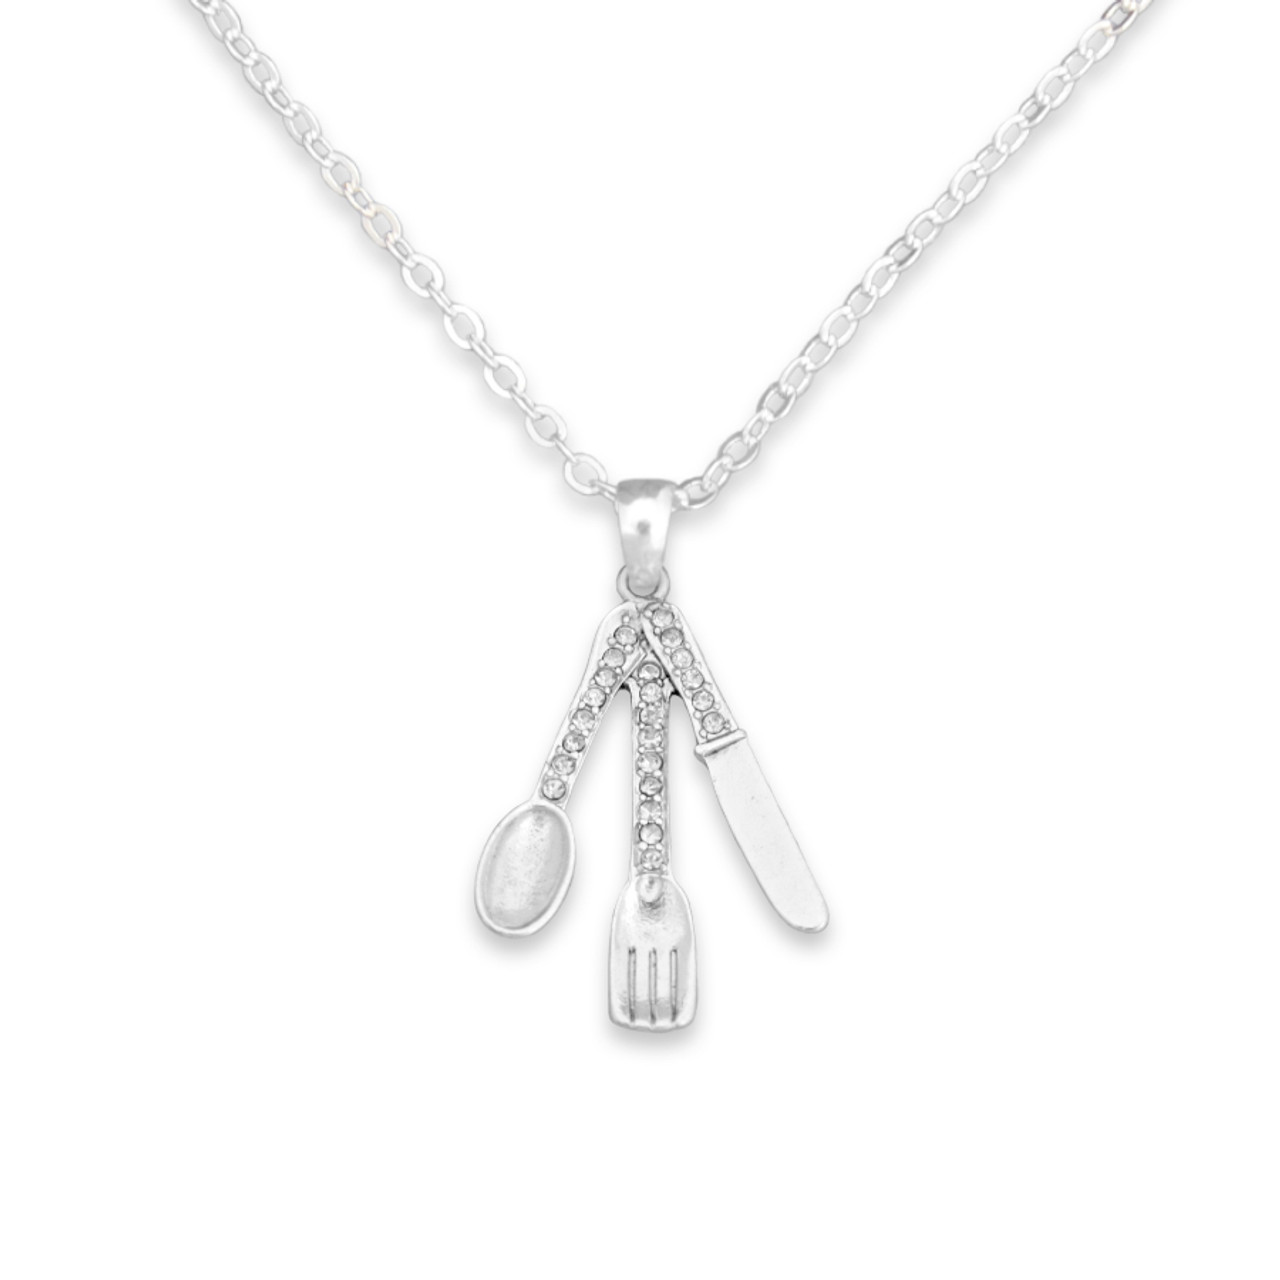 Occupation Jewelry- Crystal Silverware Necklace